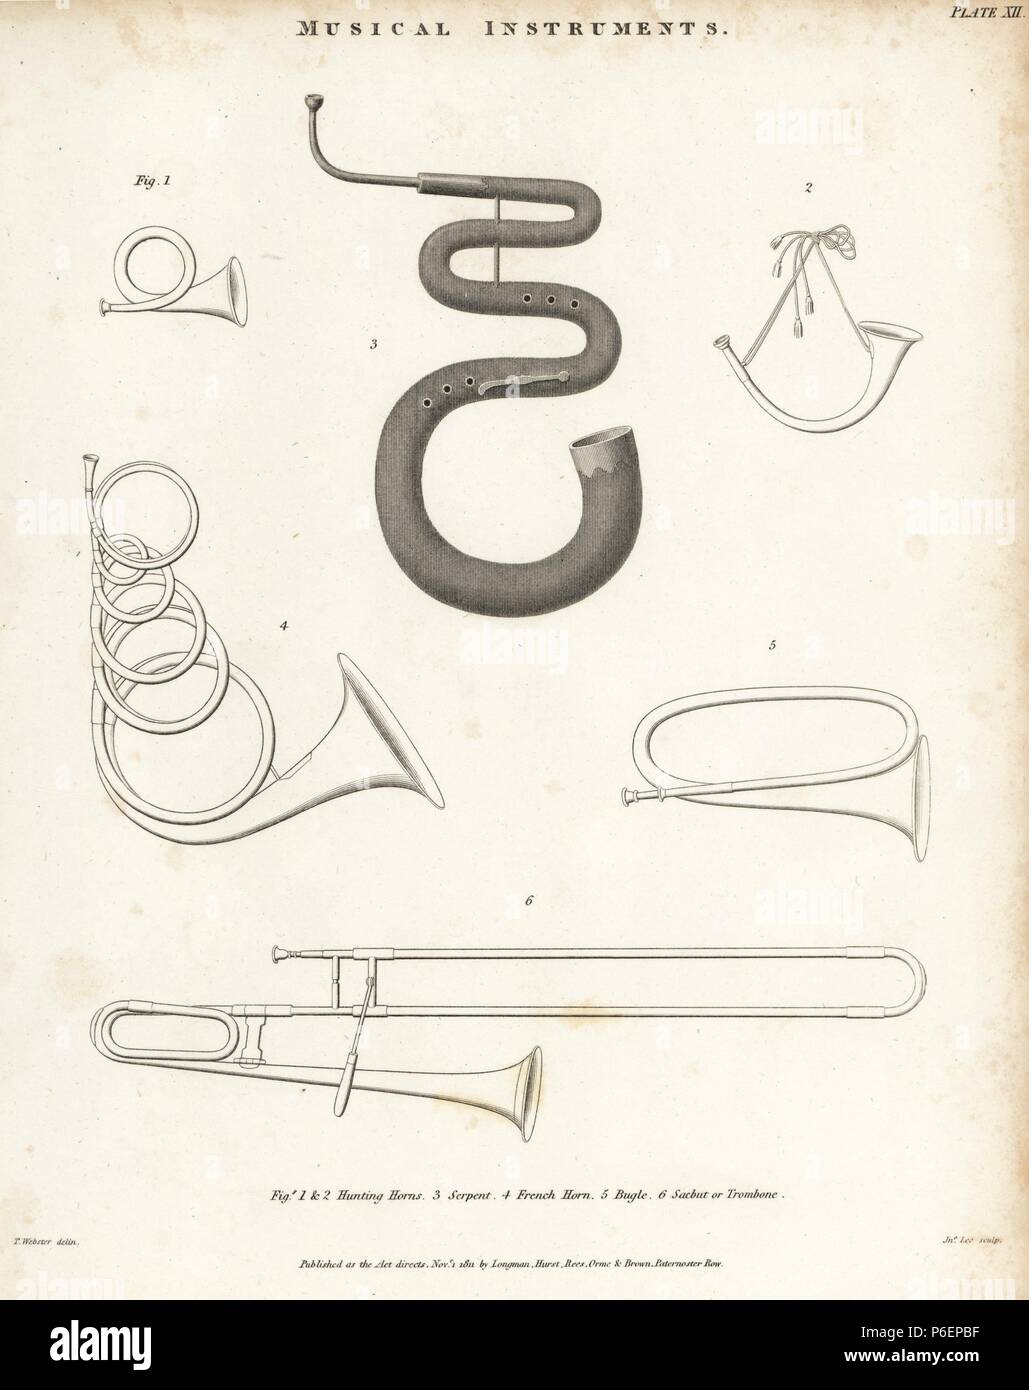 Hunting horns (1,2), serpent (3), French horn (4), bugle (5) and sacbut or  trombone (6). Brass and woodwind musical instruments. Copperplate engraving  by John Lee after a drawing by T. Webster from